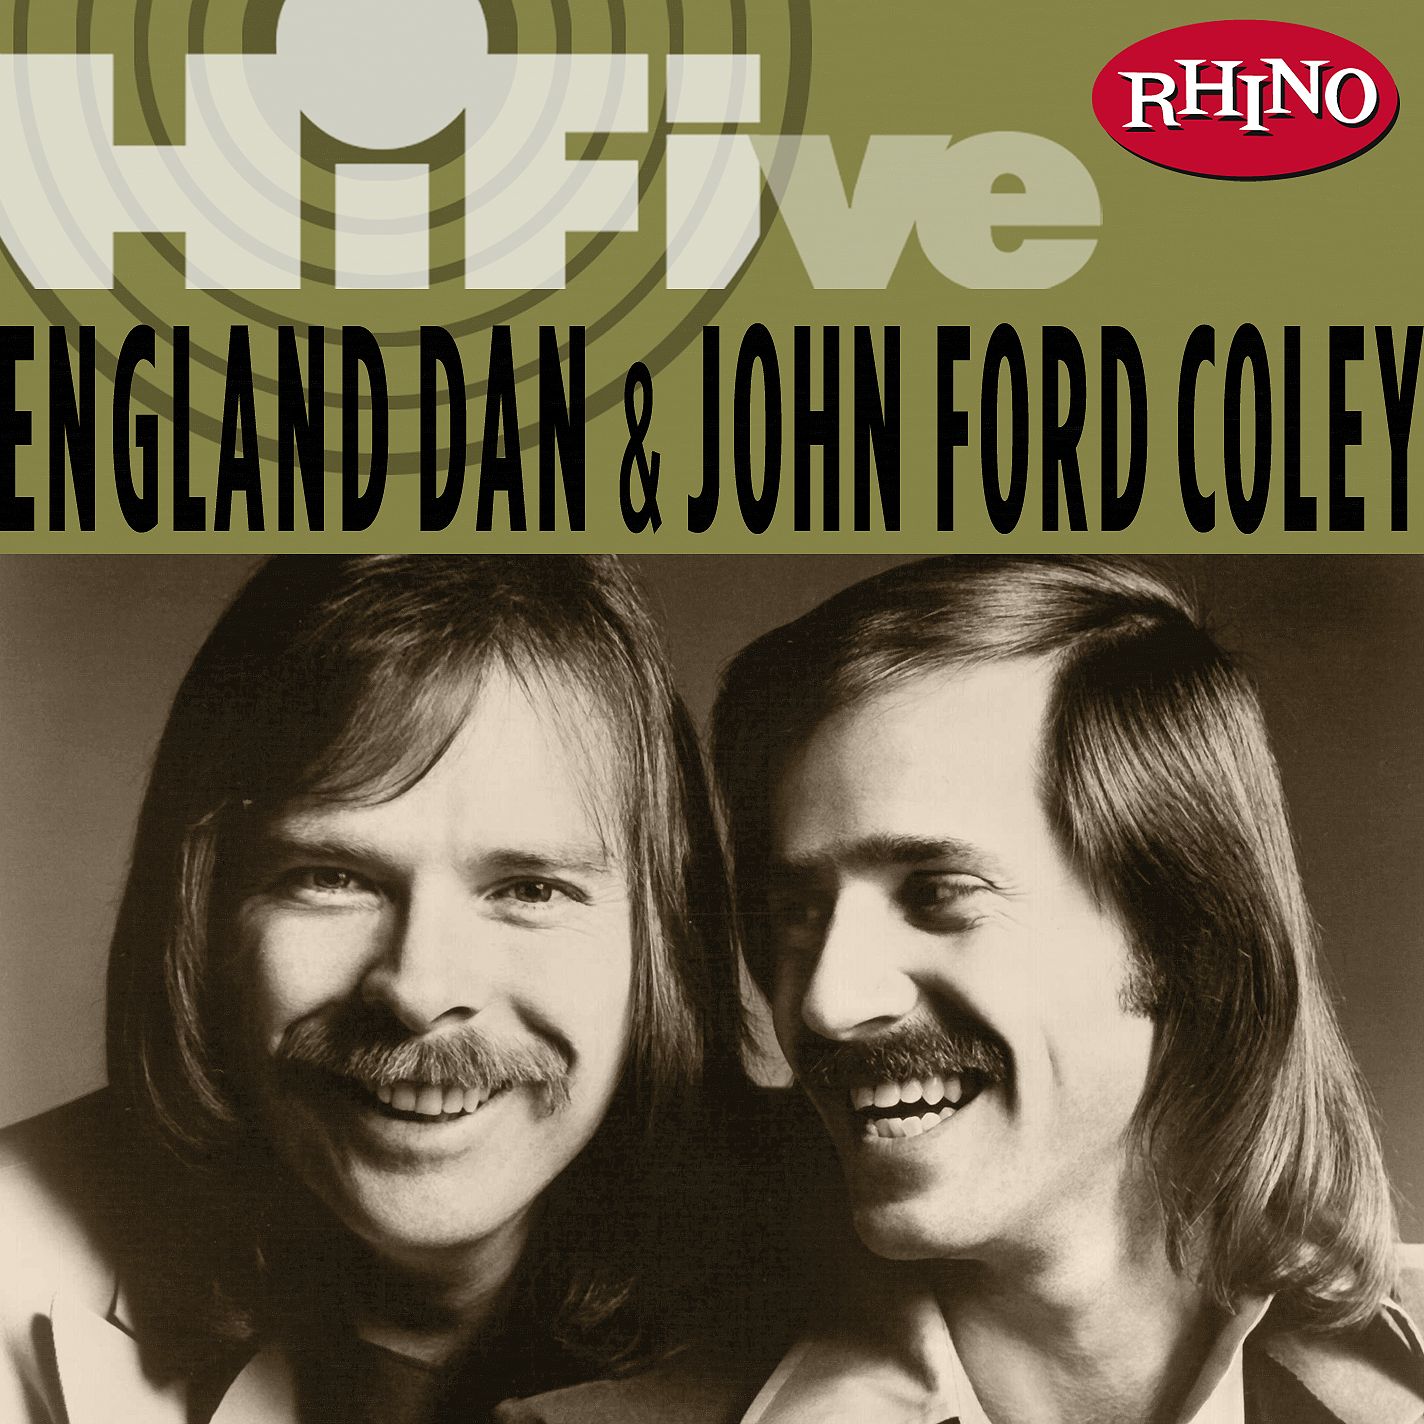 England dan and john ford coley greatest hits cd #7